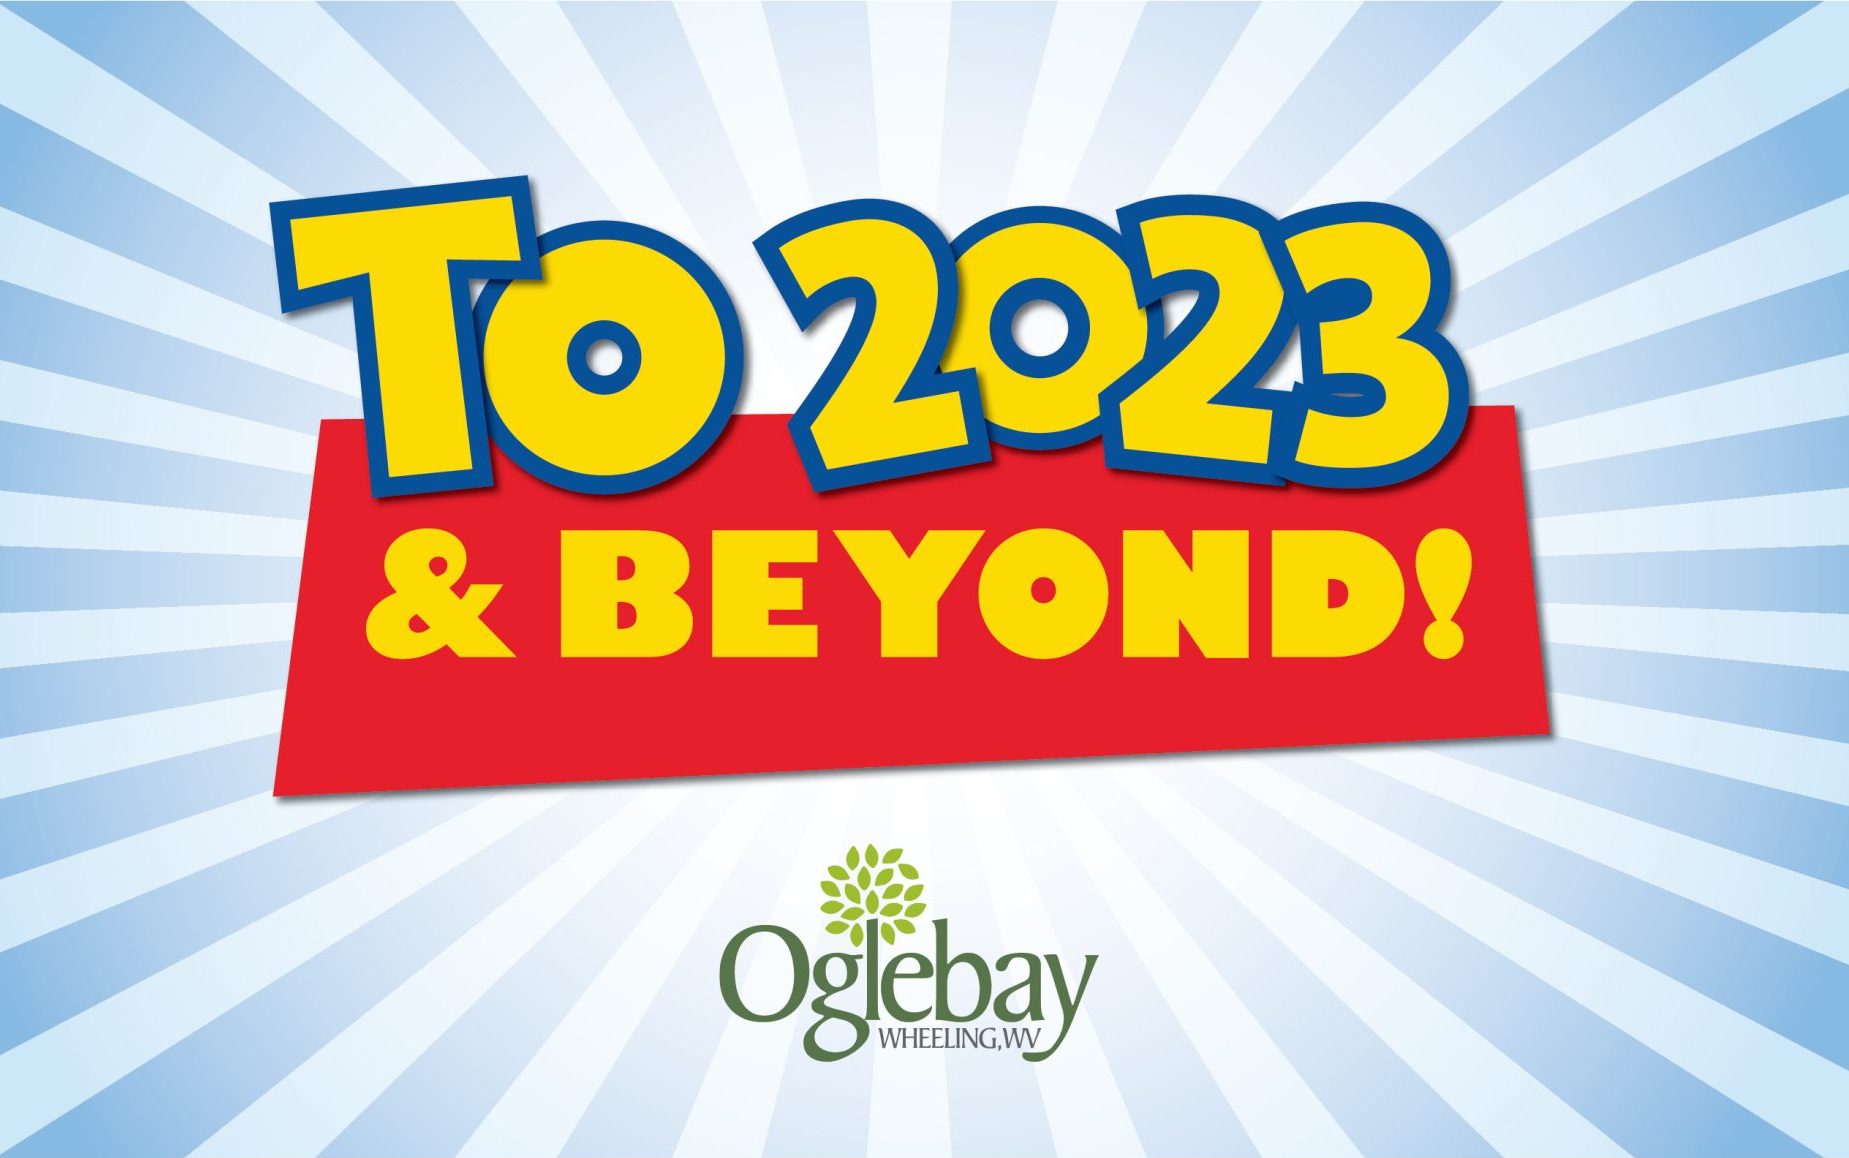 Here’s “To 2023 & Beyond!” NYE Family Package header photo